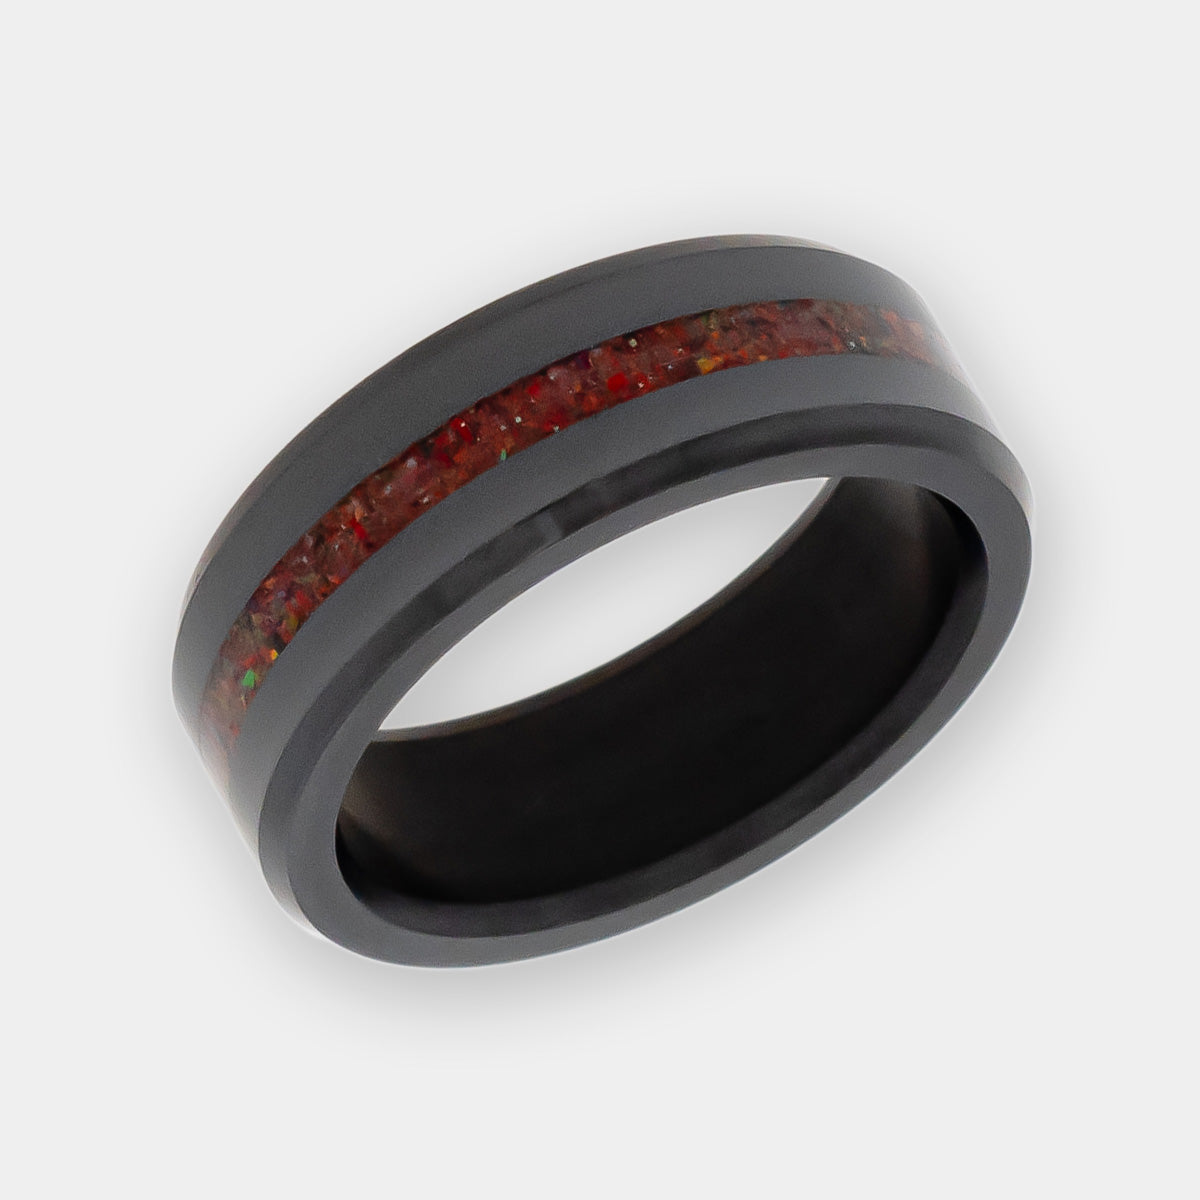 Men's Black Diamond & Magma Red Opal Ring with a white background | Elysium ARES | Mens Opal Rings | Red Opal Wedding Band Men | Red Opal Ring Men